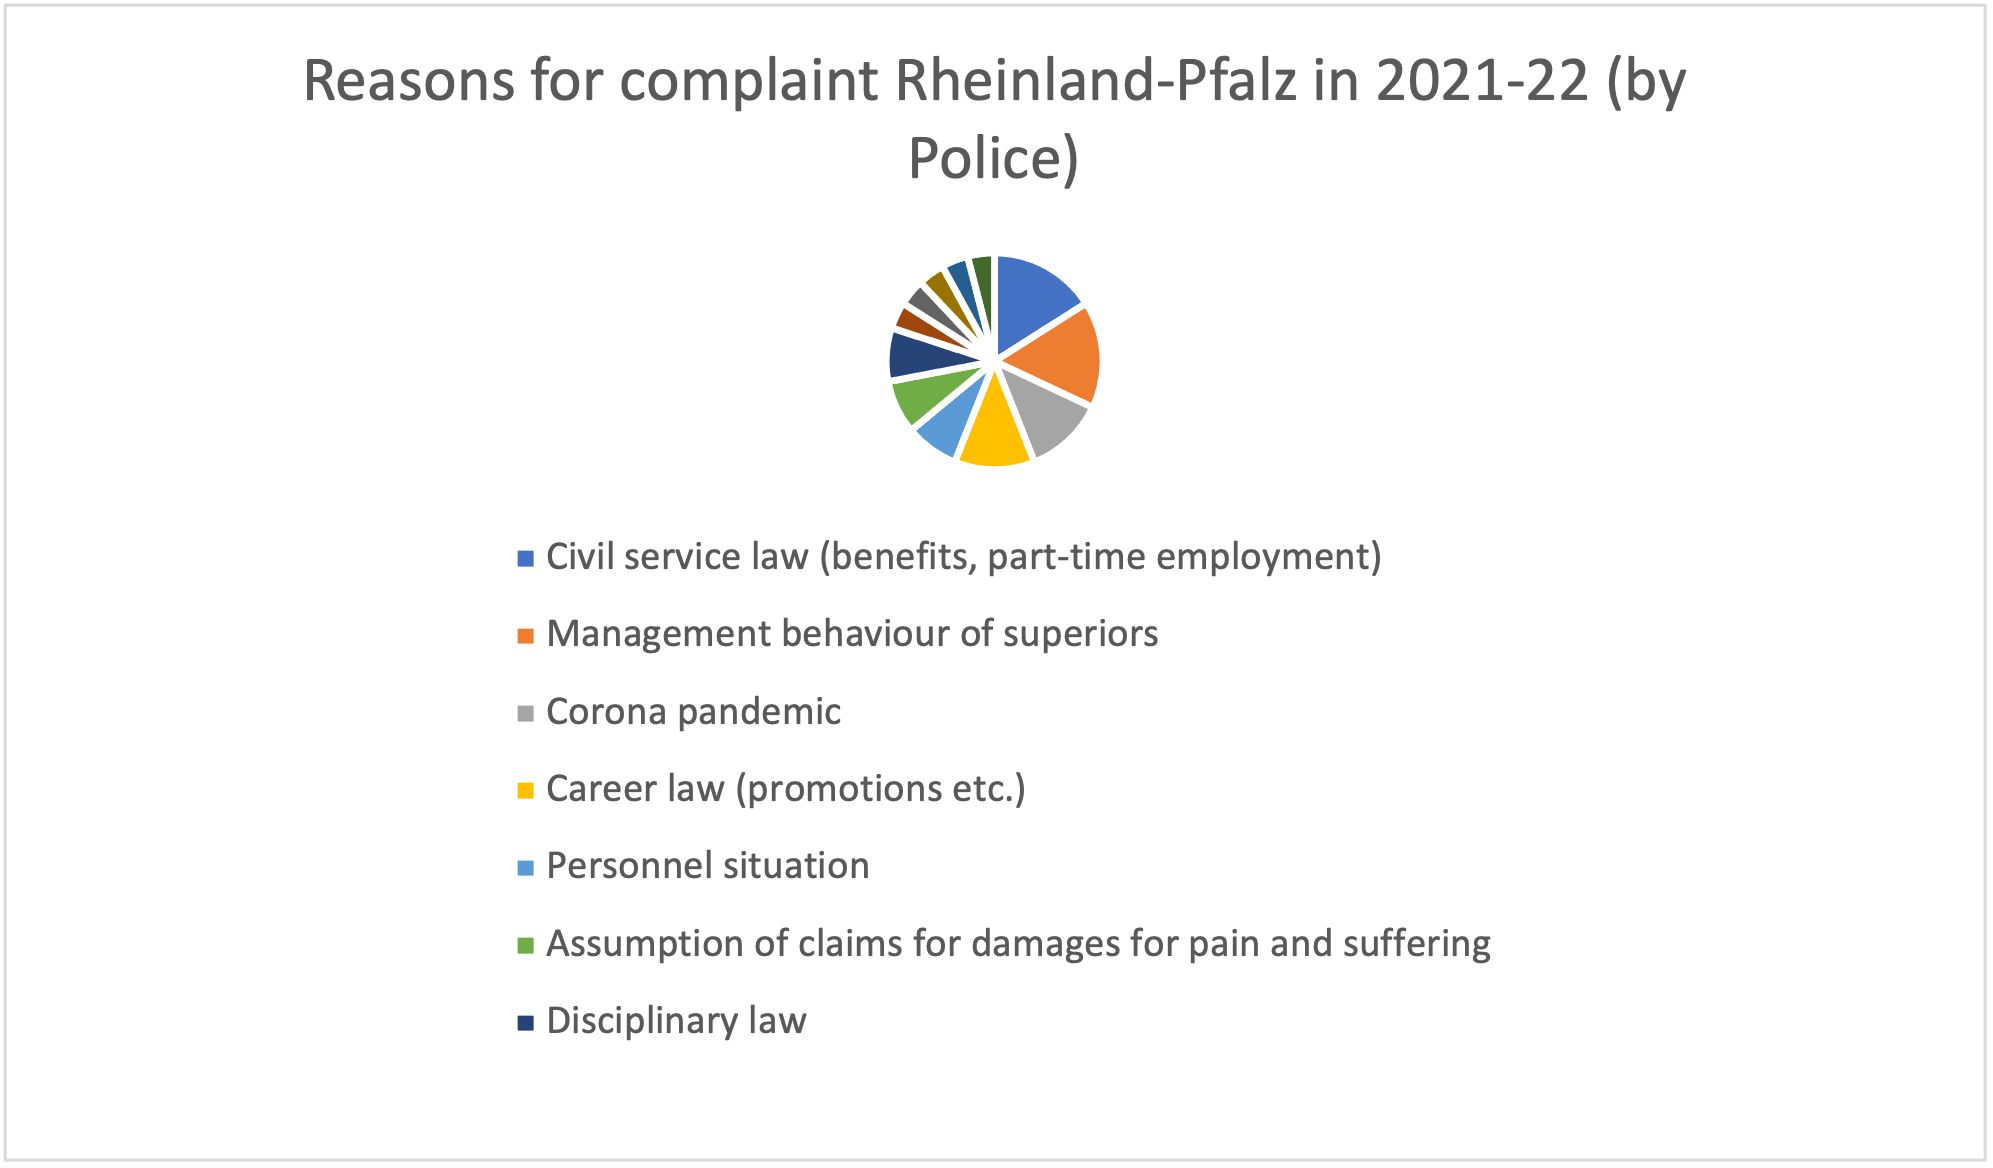 Germany InfoGraphic 3 - Reasons for complaints in Rheinland-Pfalz by police in 2021-22